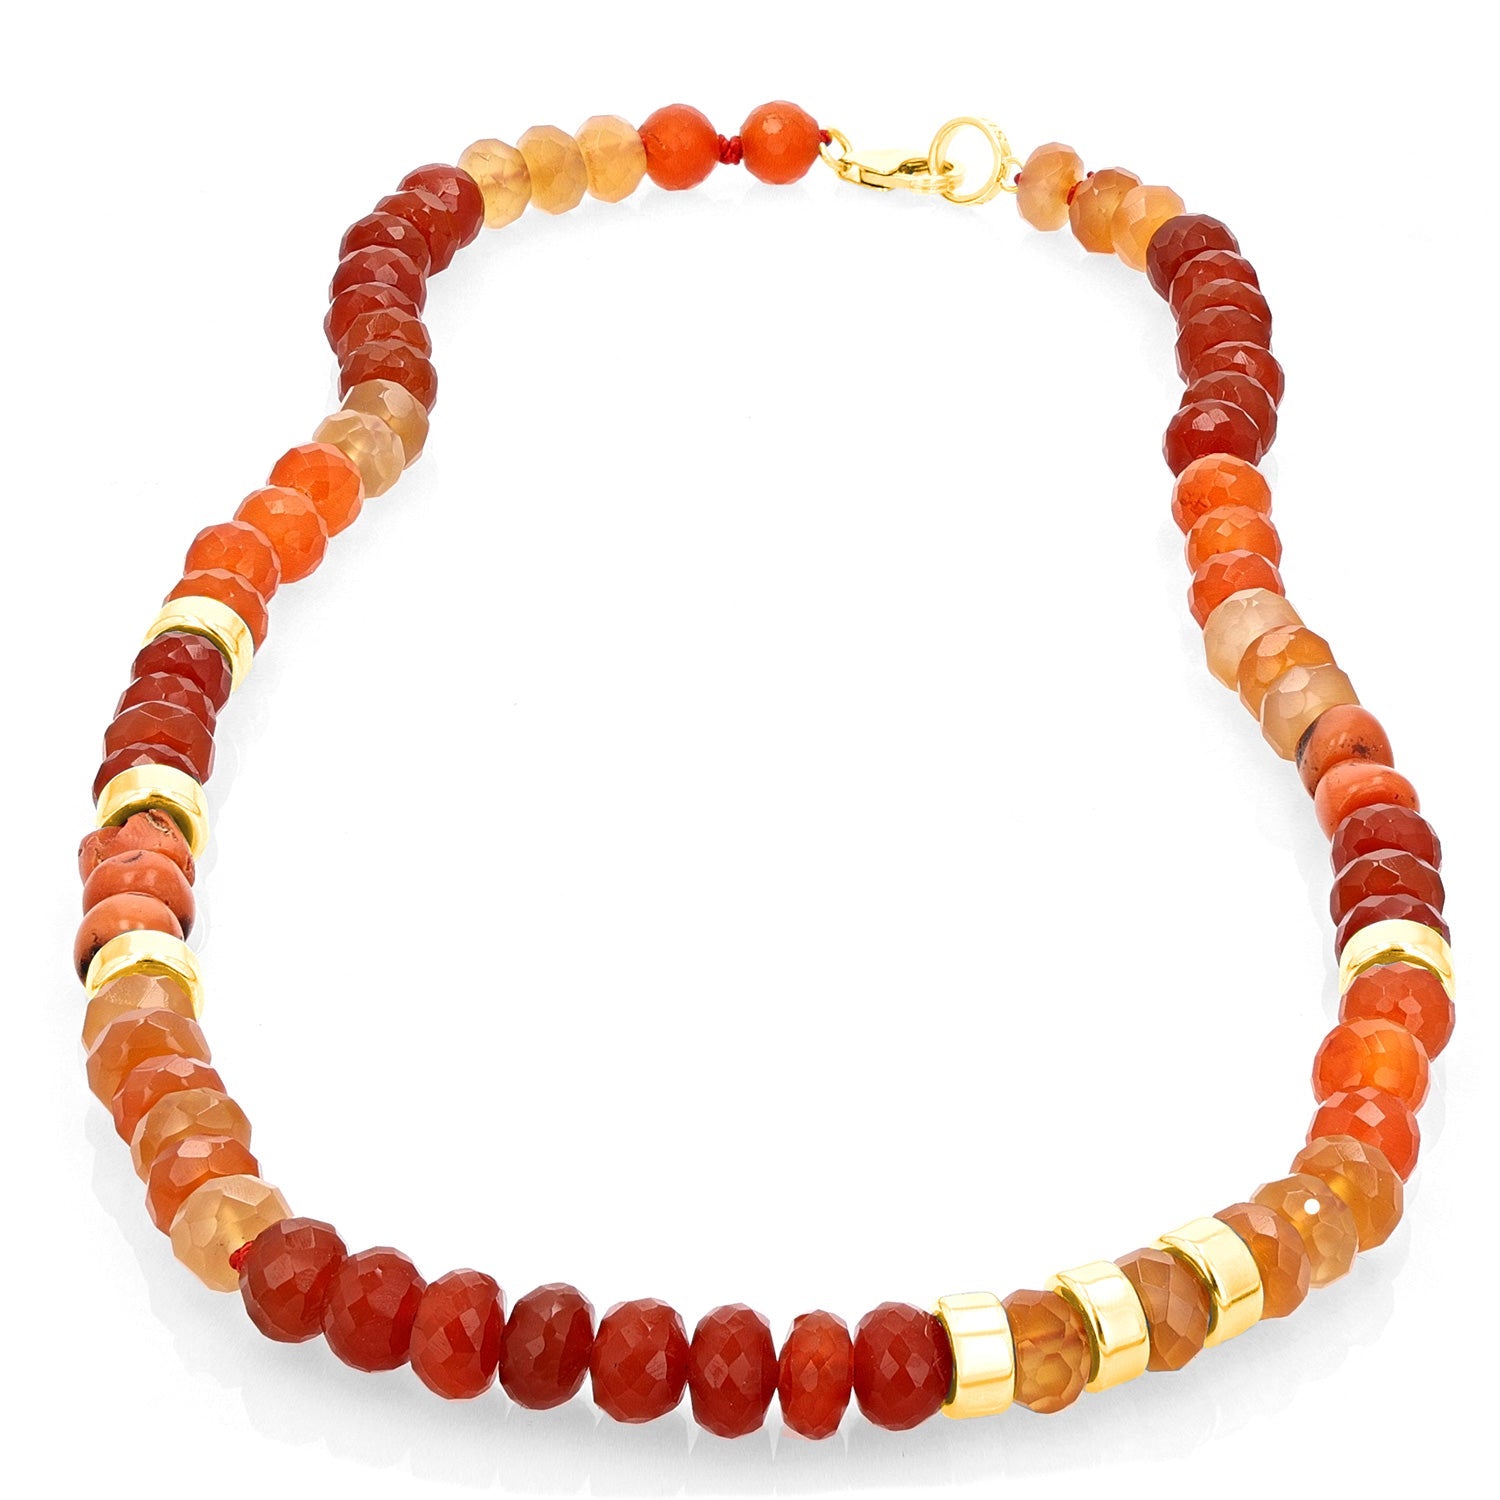 Hand Knotted Tangerine Gemstone Mix Carnelian and Coral Necklace-18" NG002833 - TBird